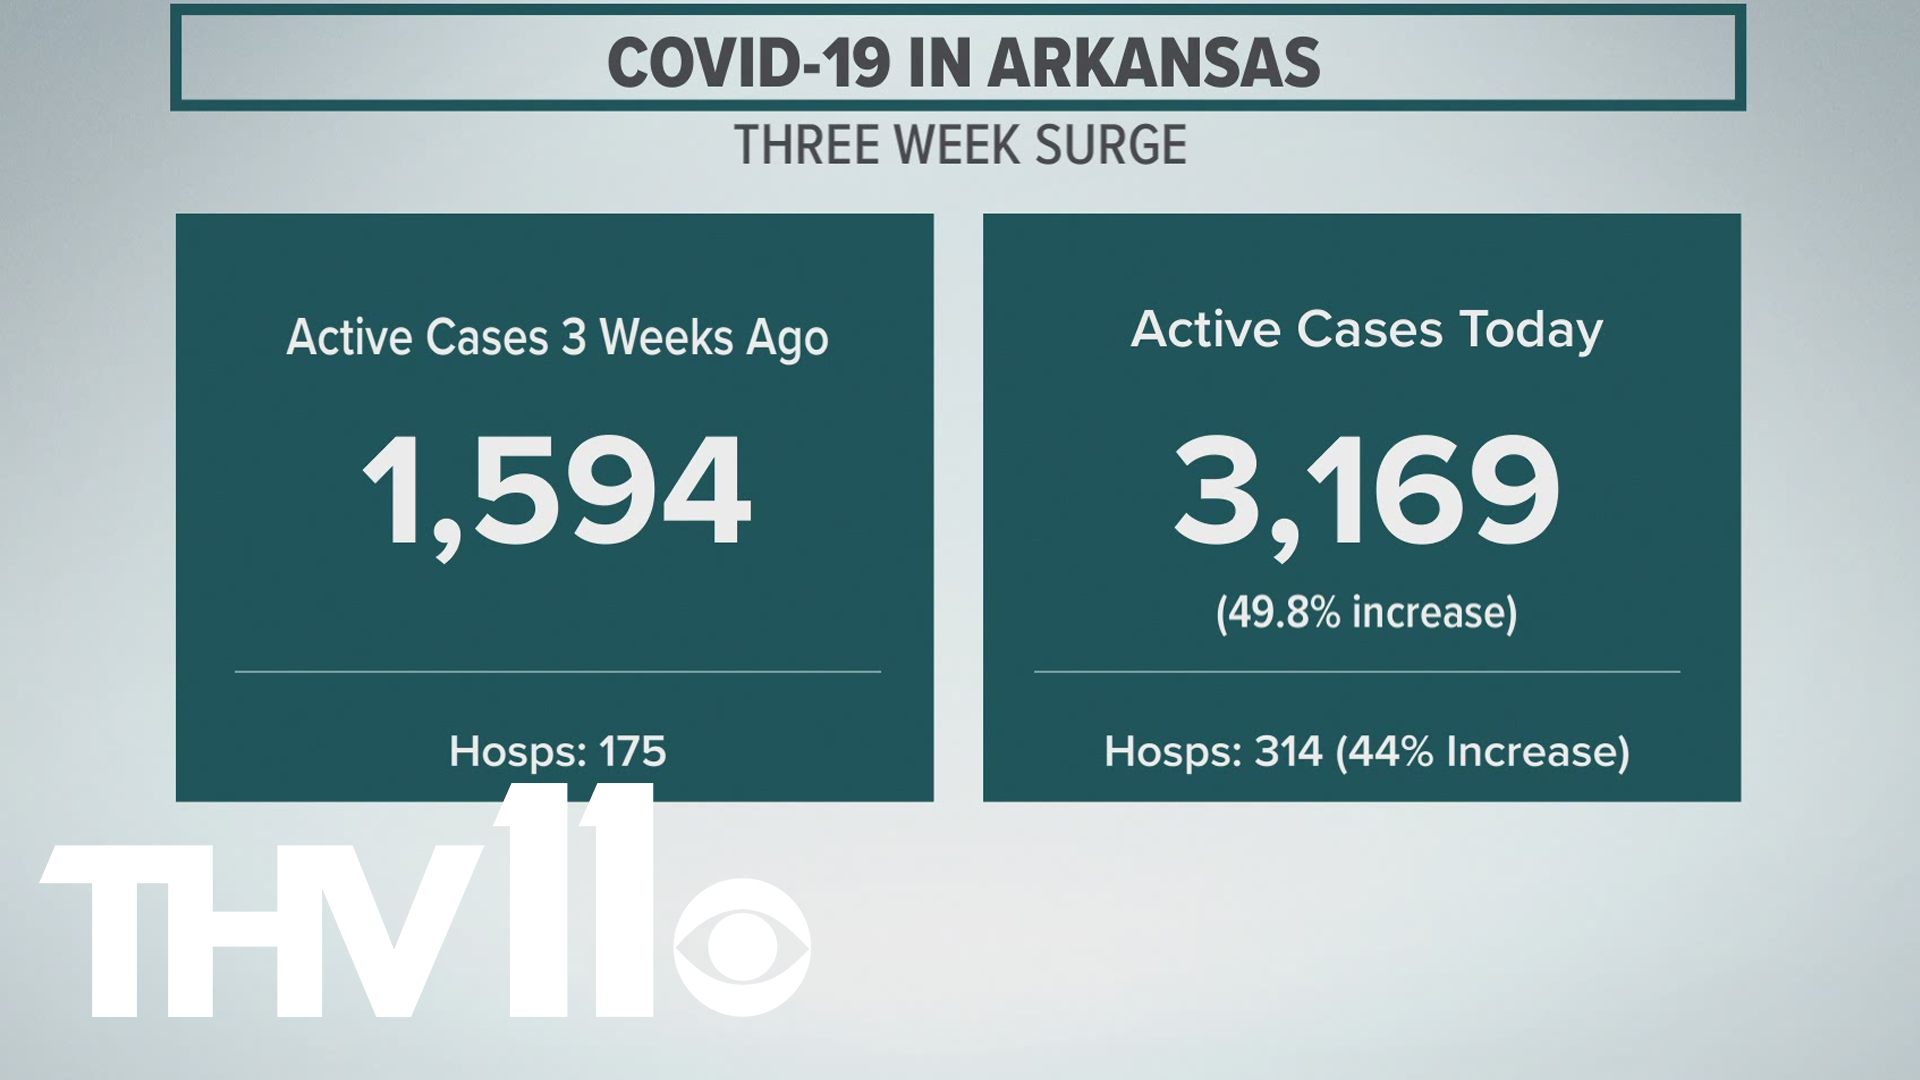 Amanda delivers the top news stories for June 29, 2021 which includes a rise in COVID-19 cases in Arkansas and more.